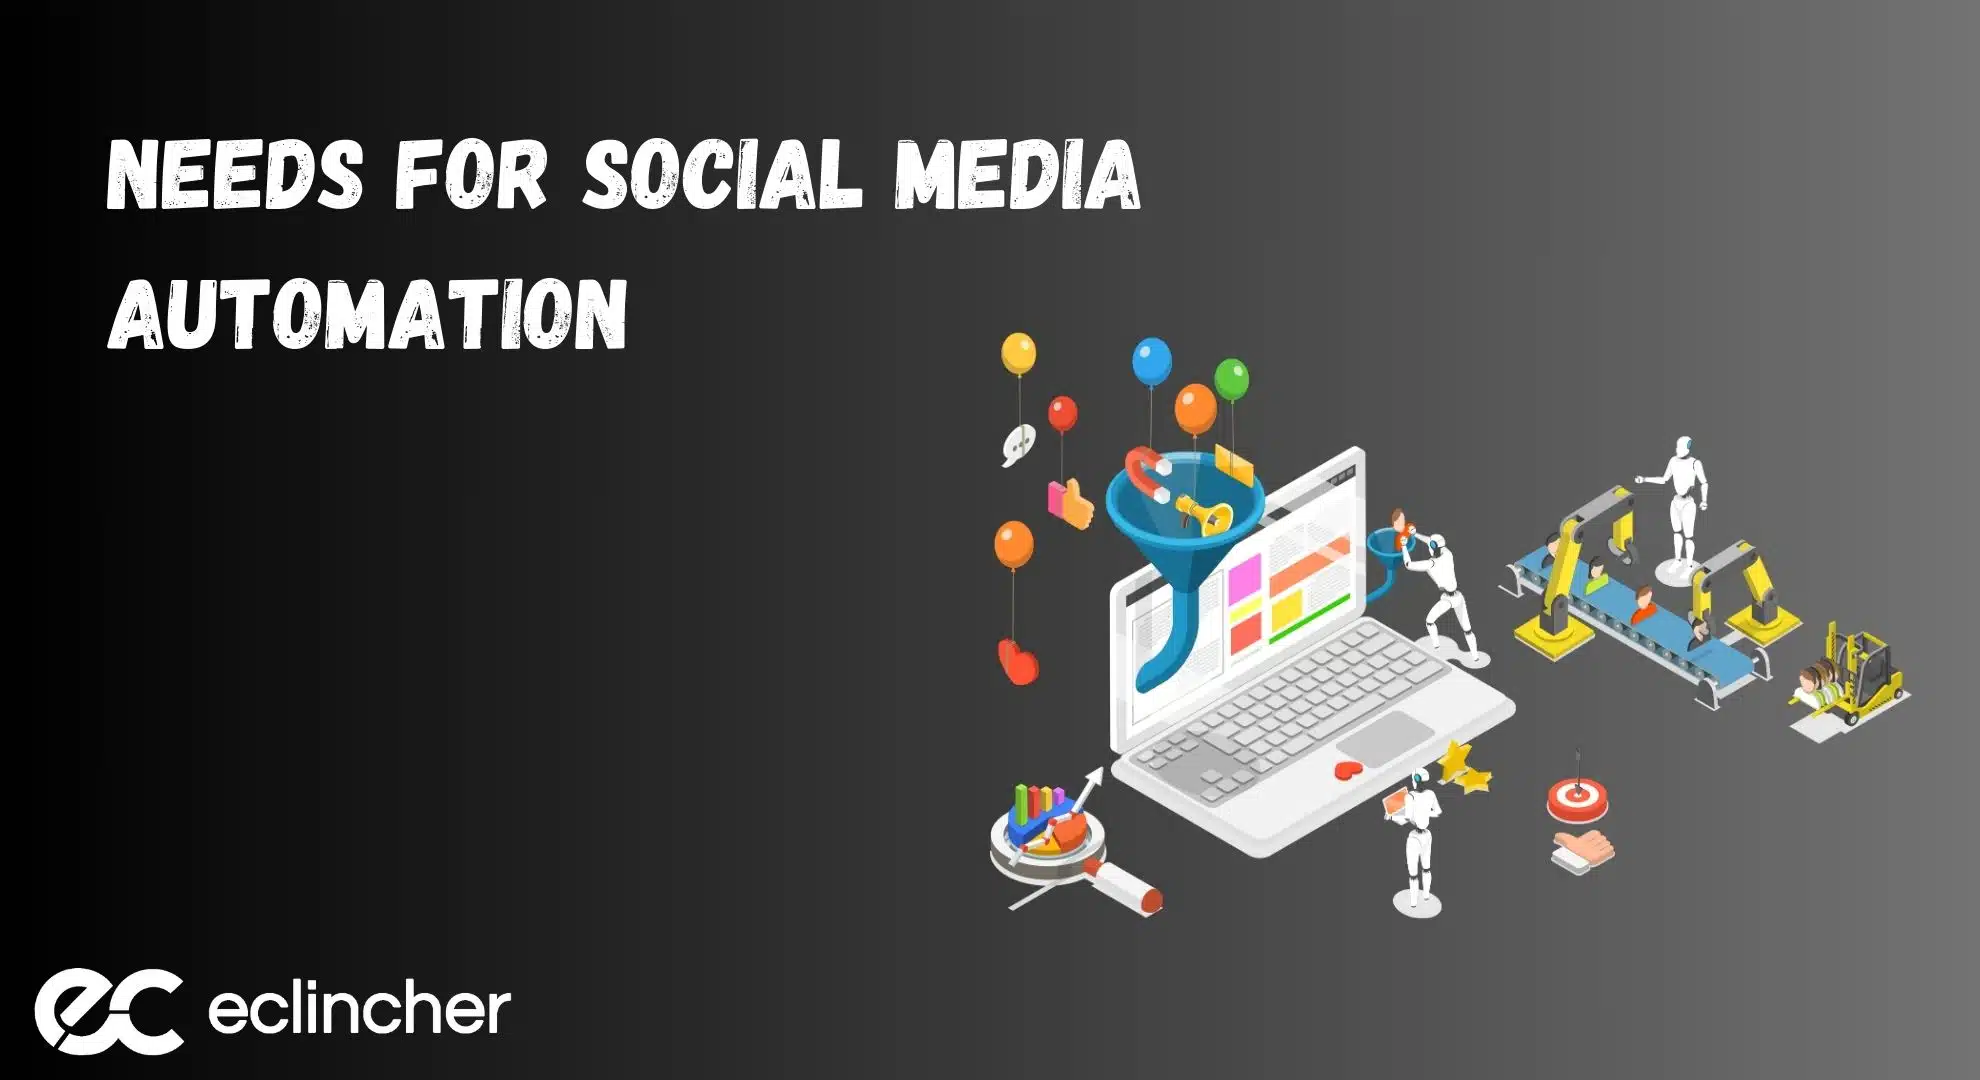 Understanding the Needs for Social Media Automation